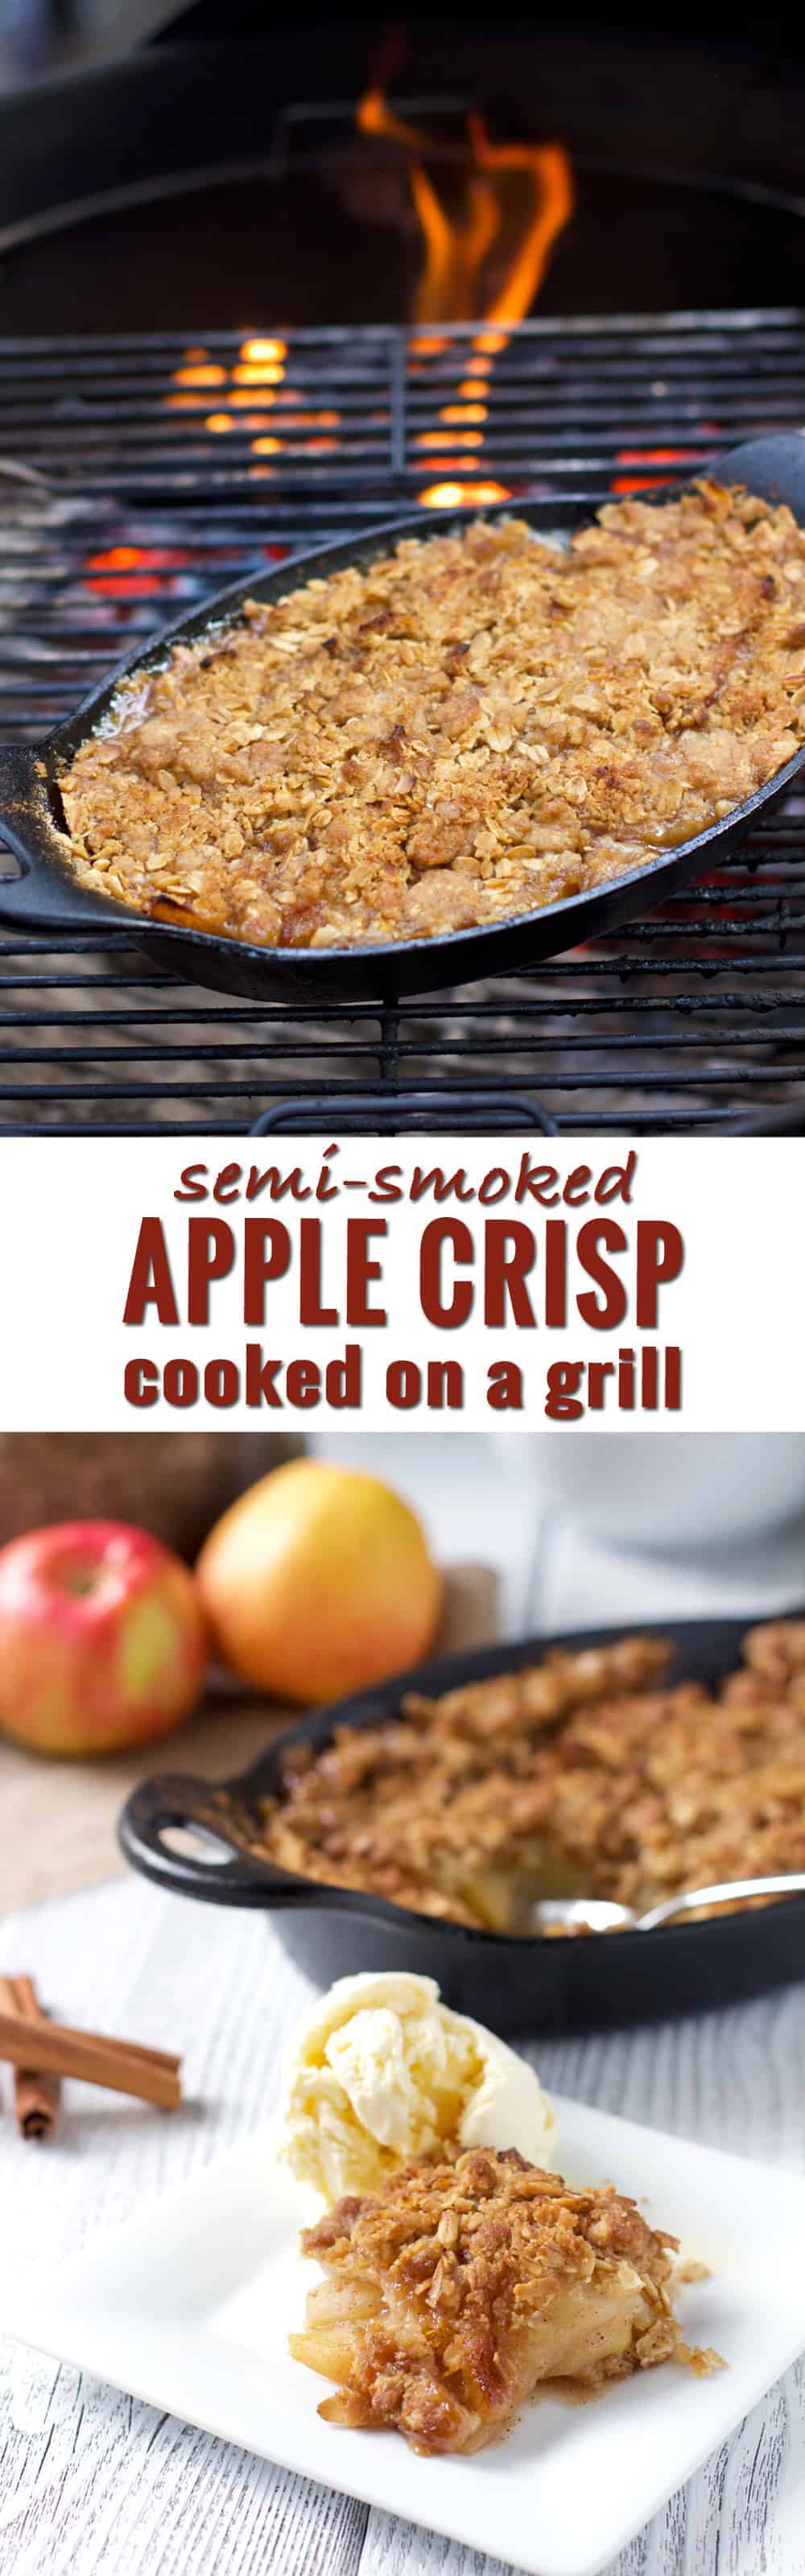 How to make an apple crisp on the grill (for four people). Did you know you can also add smoky flavor without needing a smoker? This is the perfect fall dessert for grill lovers. The entire family will love it! 